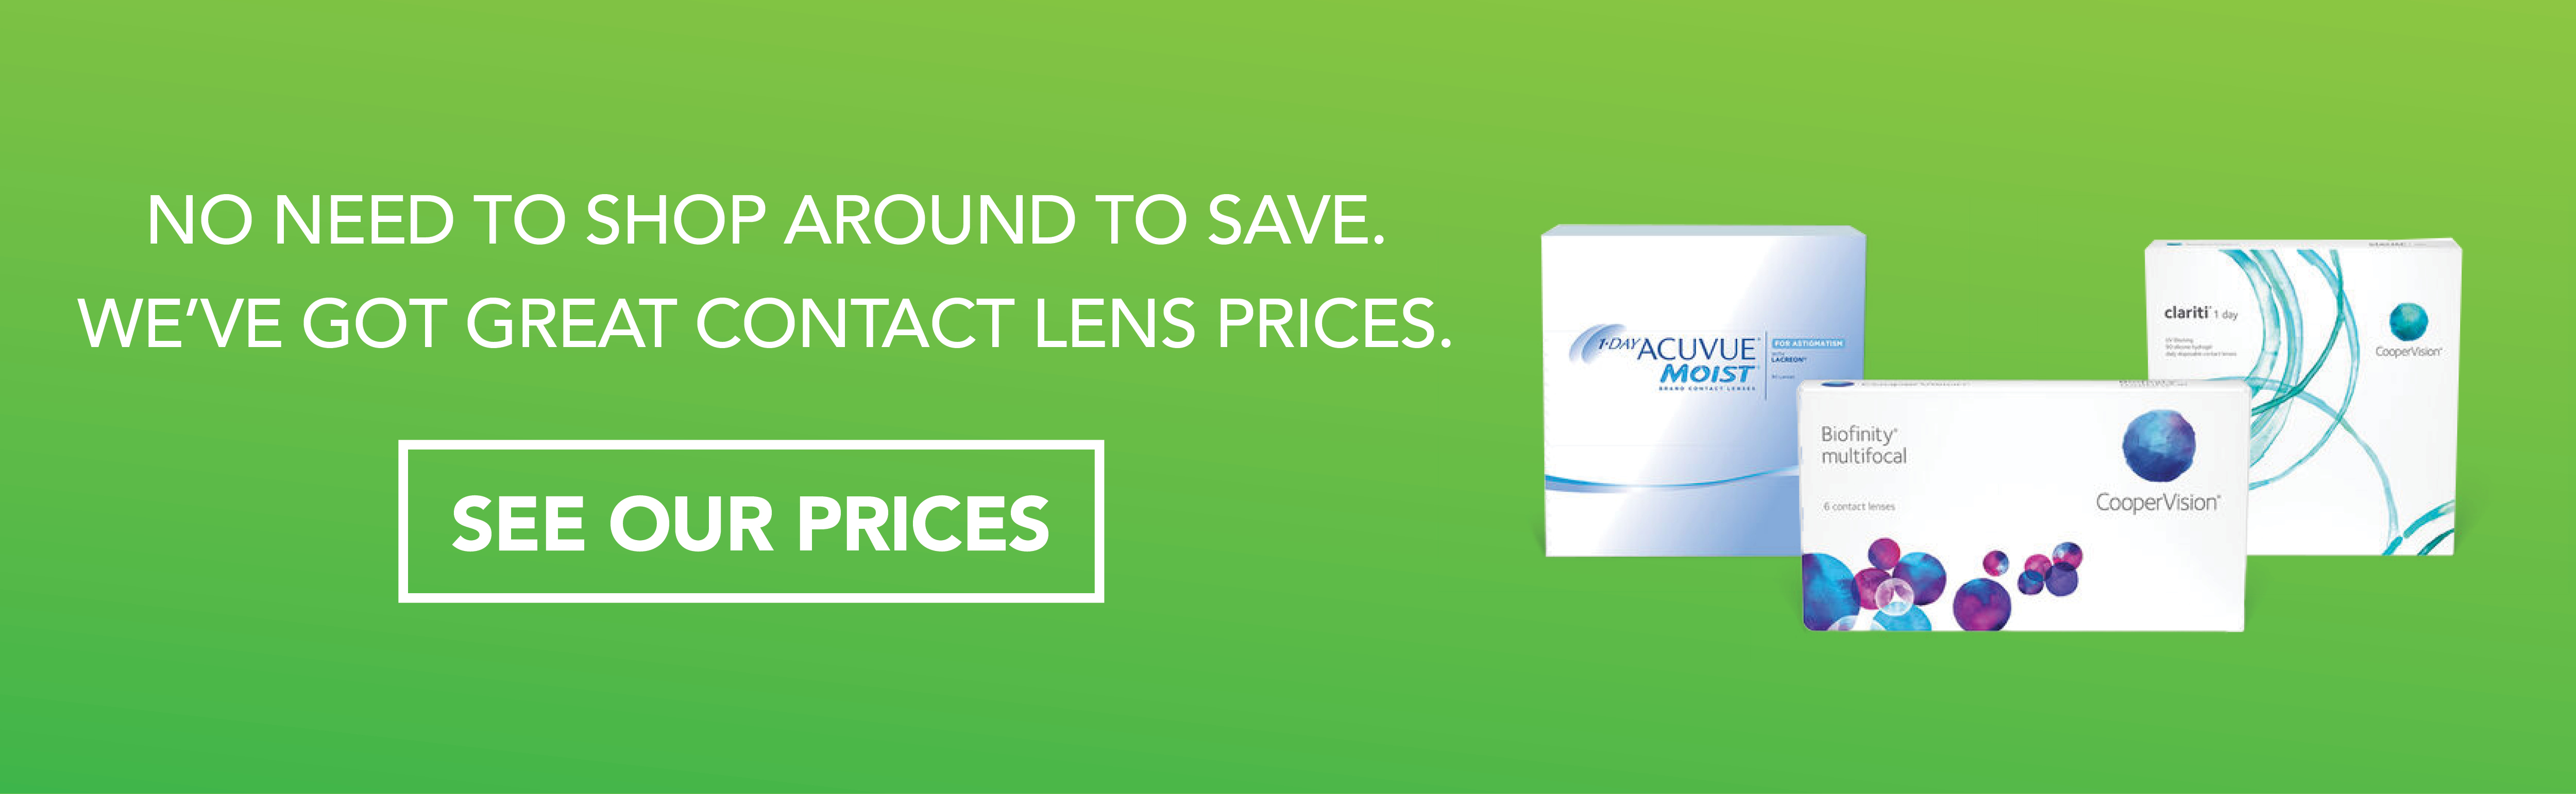 We've got great contact lens prices.